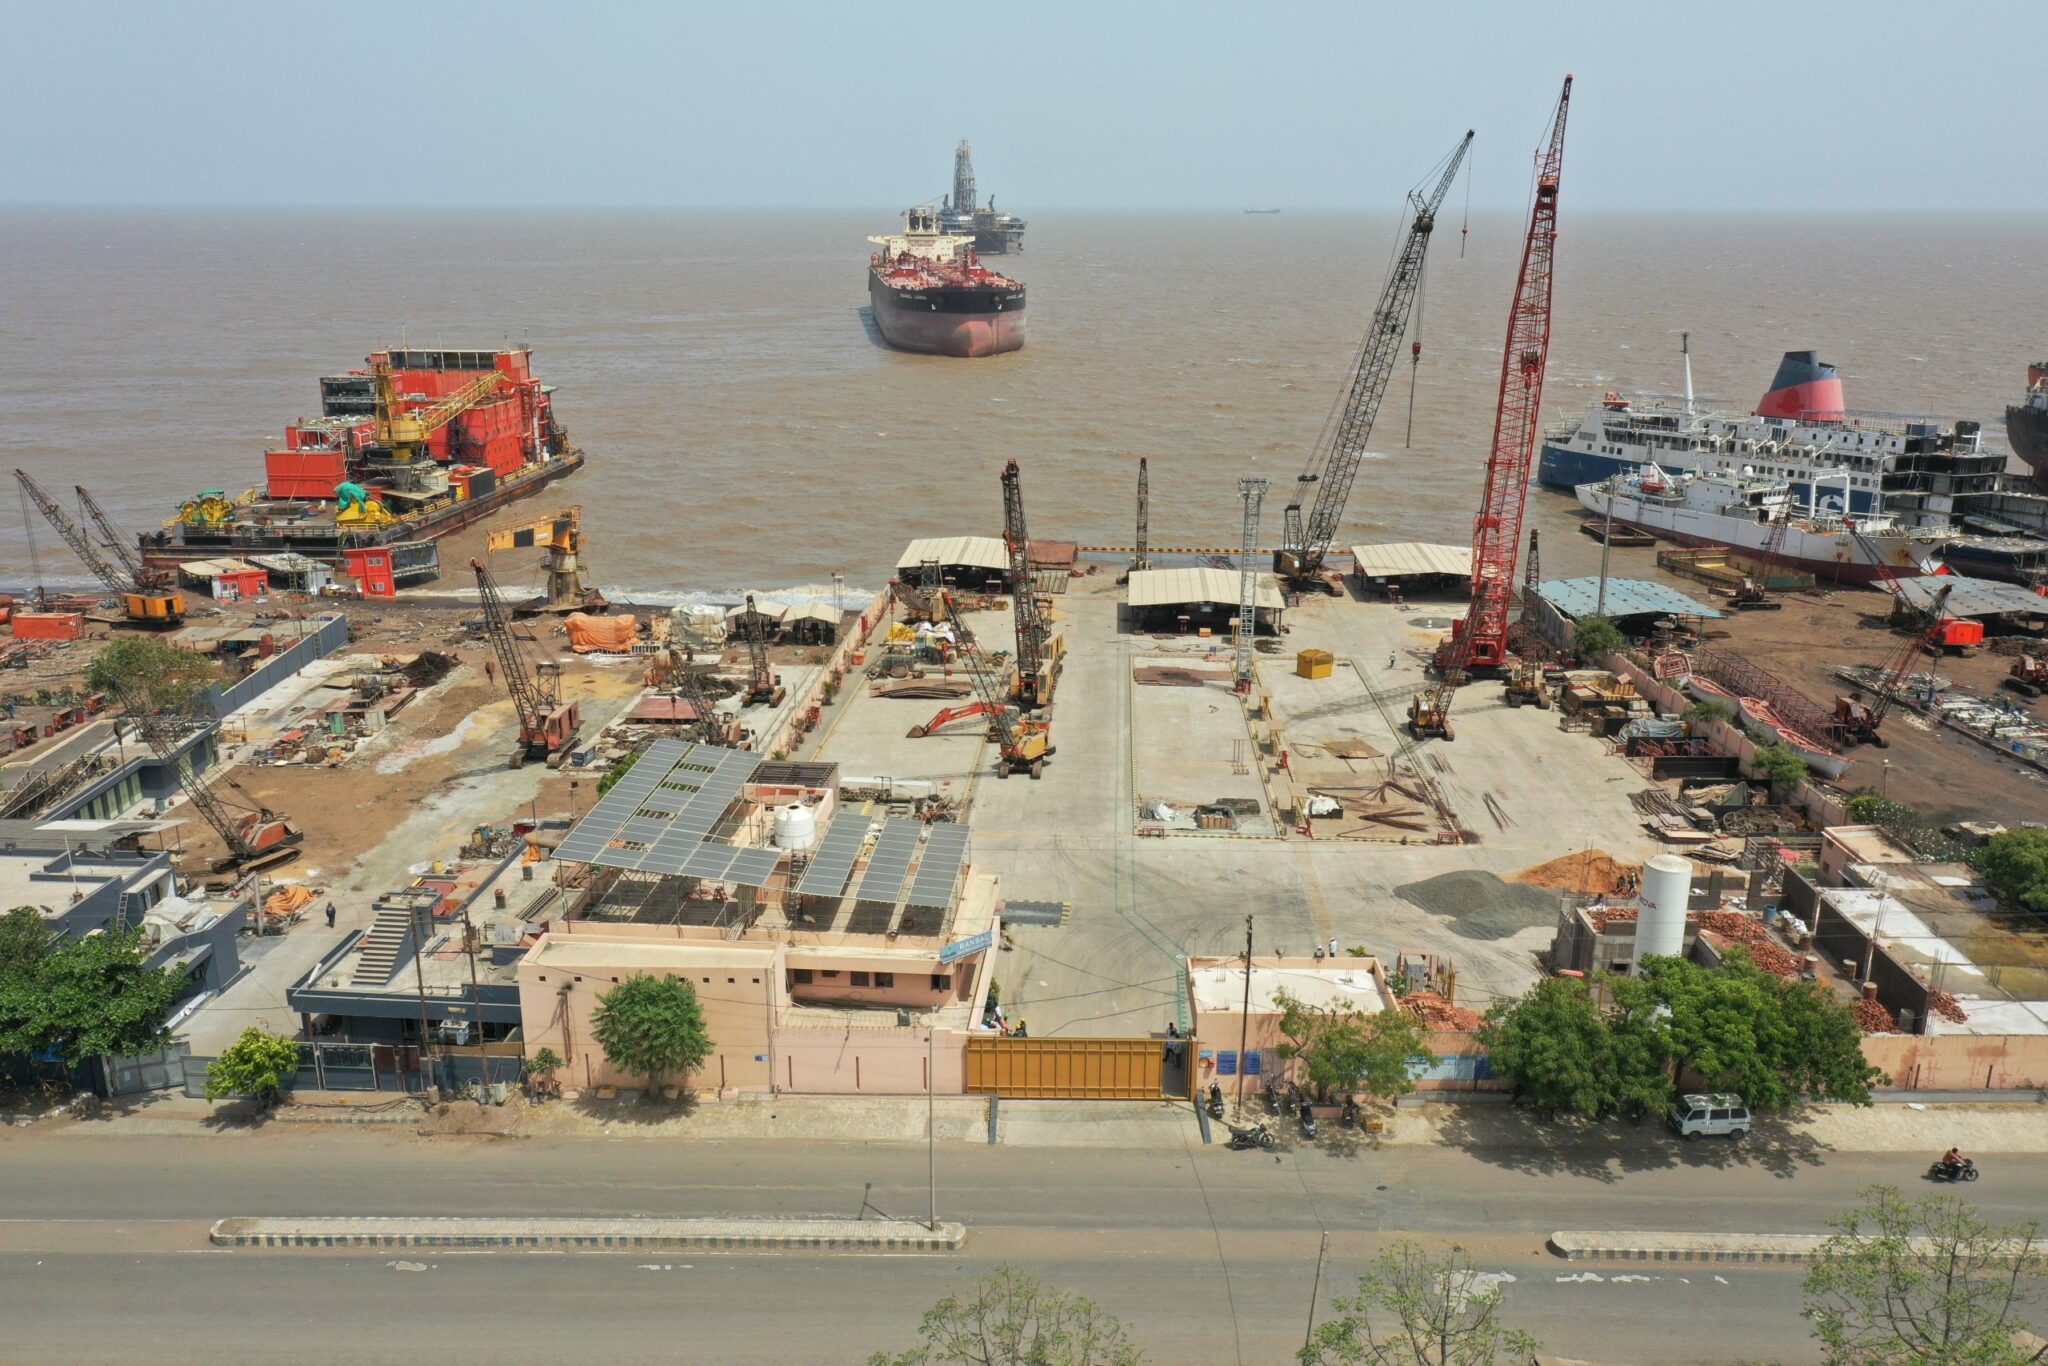 Alang's Ship Recycling Renaissance: A Beacon of Hope in Challenging Times